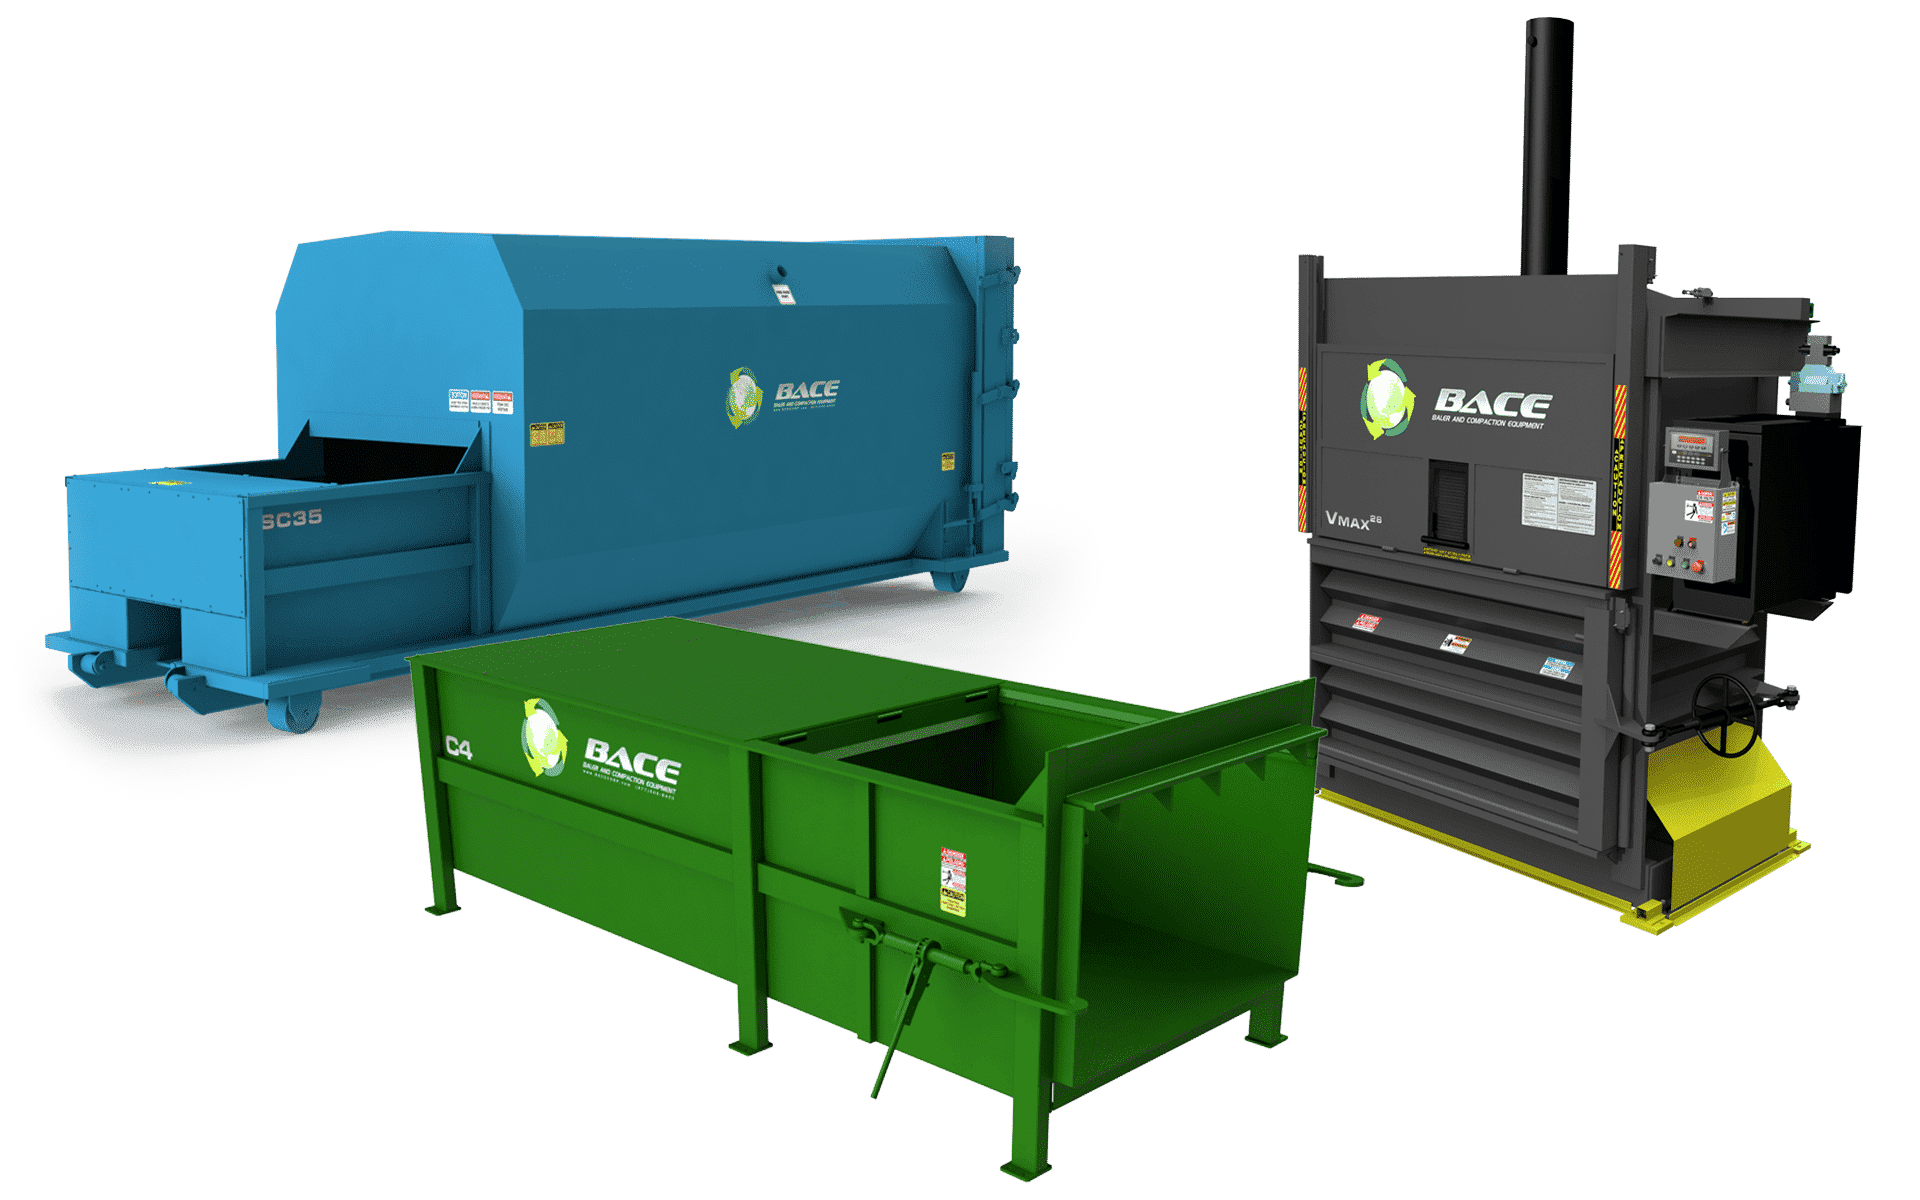 BACE: Balers and Compaction Equipment